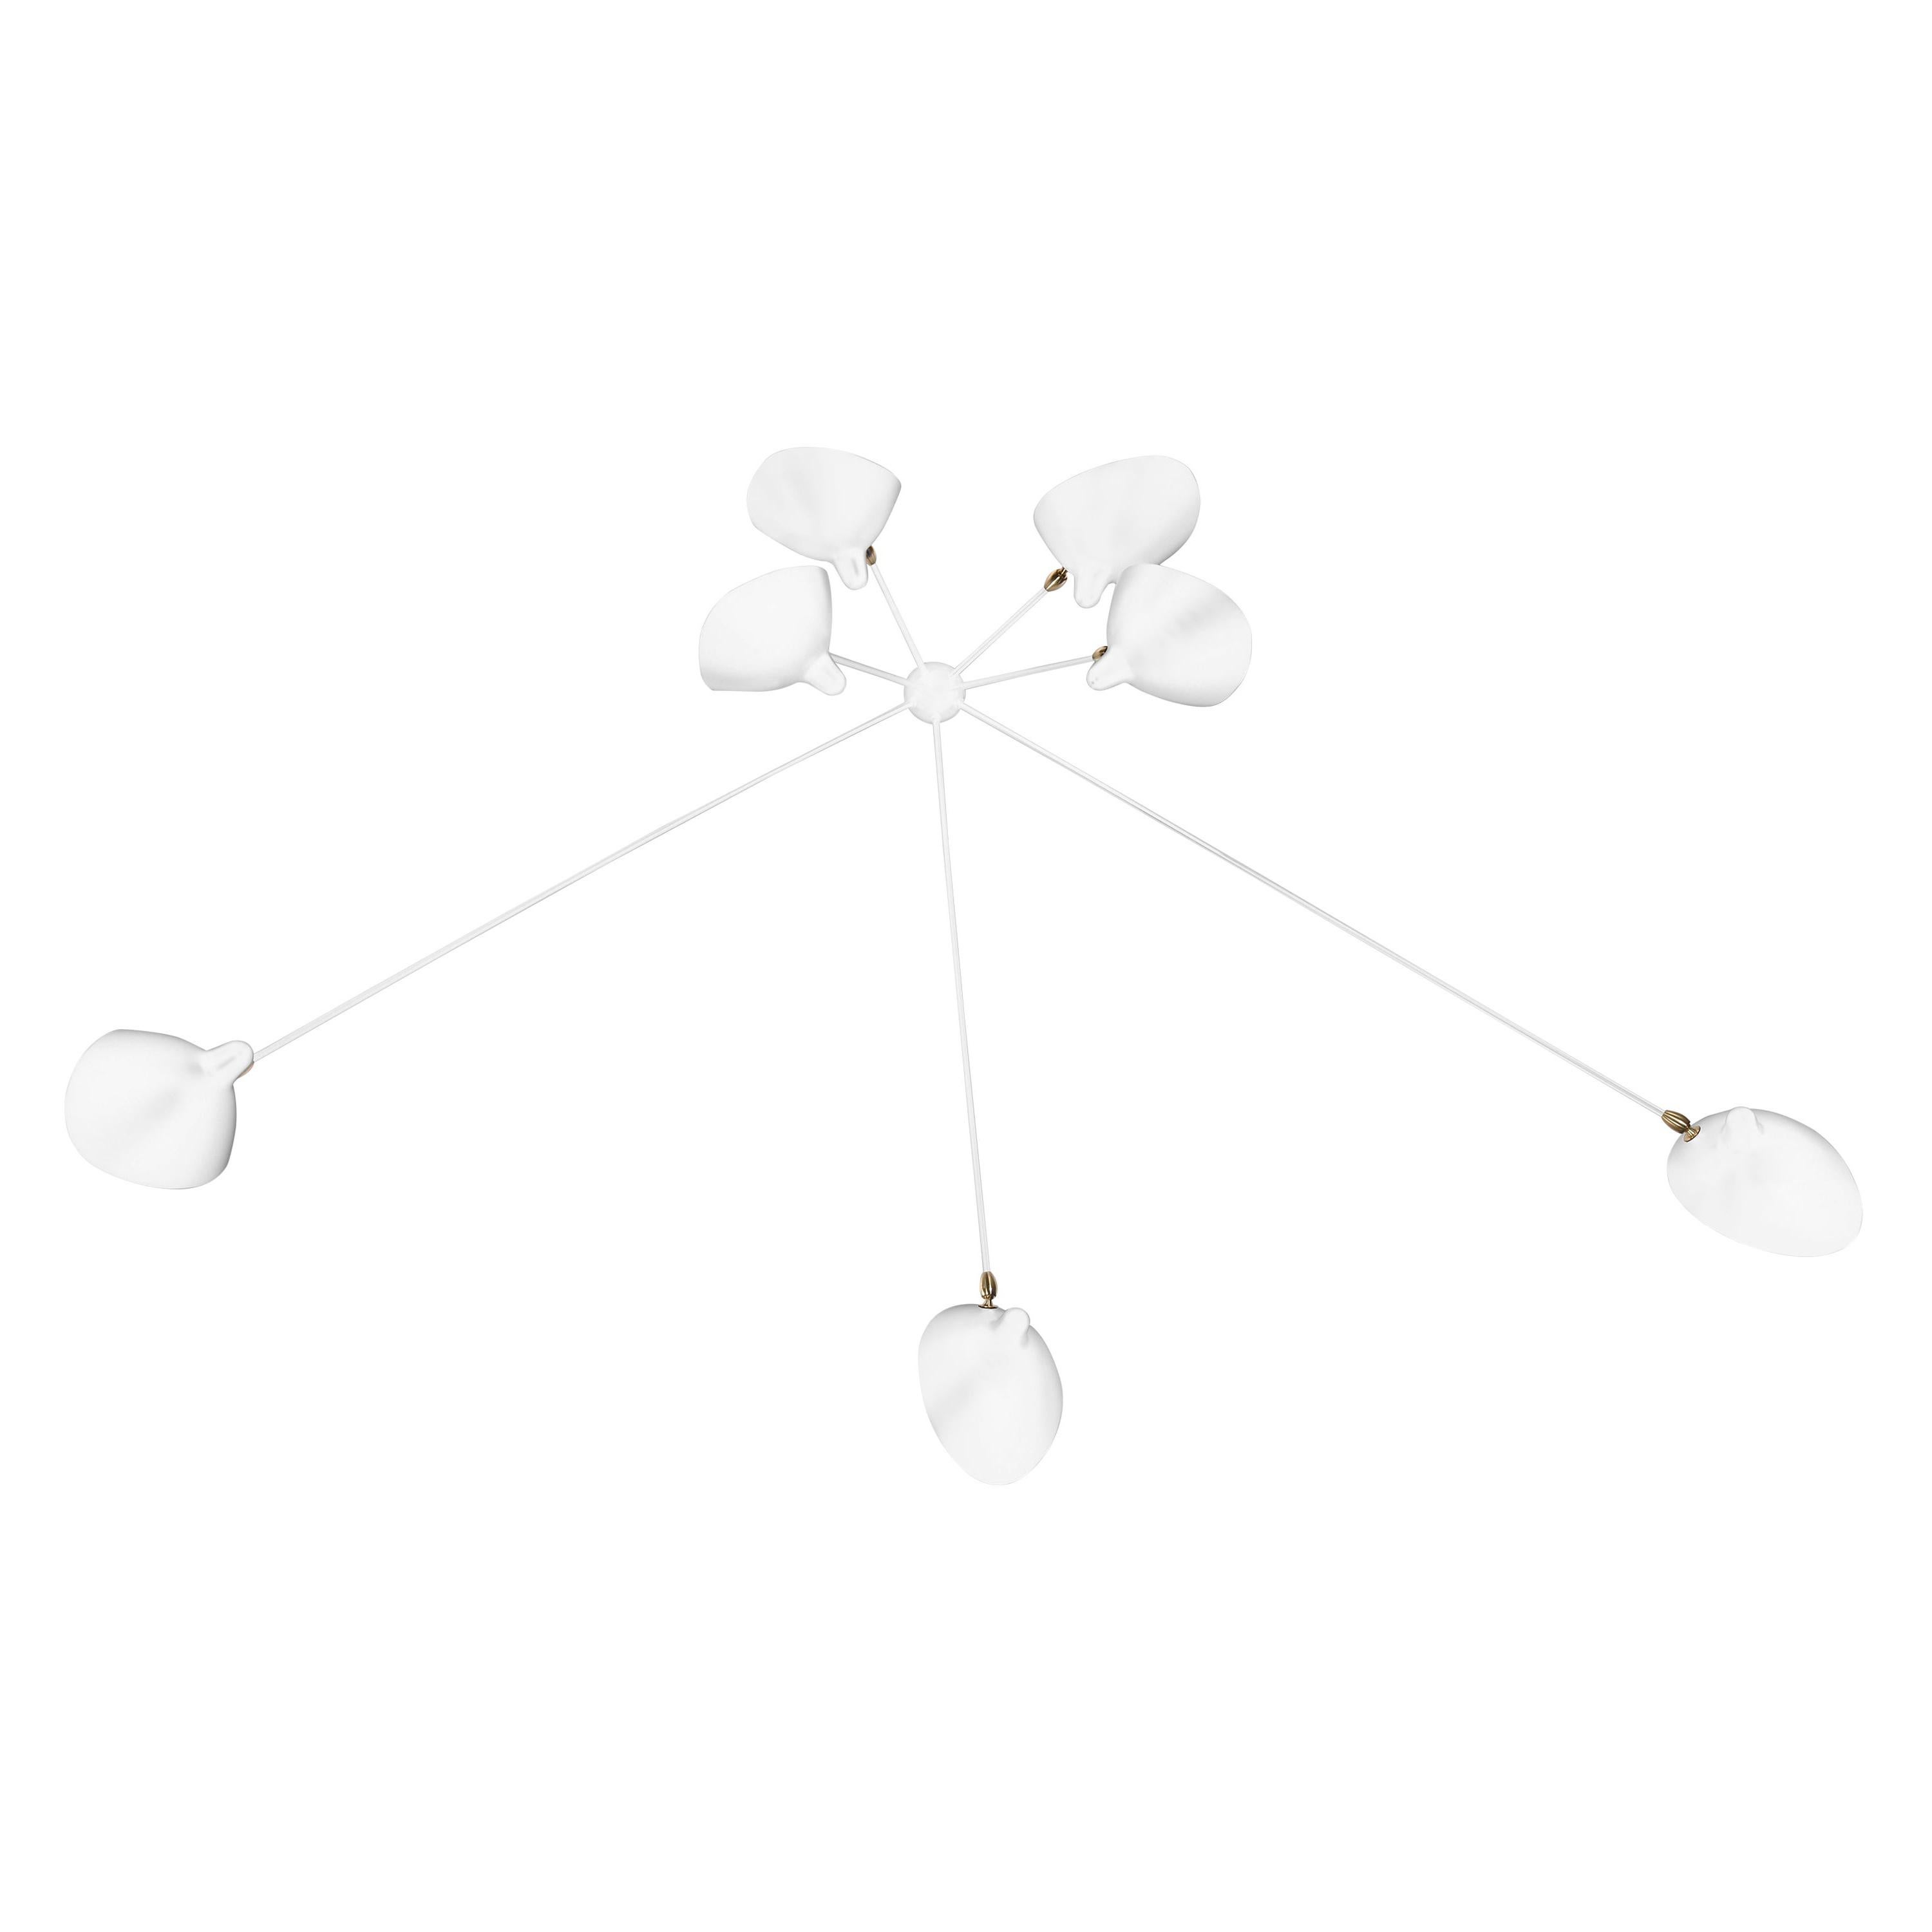 Serge Mouille Mid-Century Modern White Seven Fixed Arms Spider Wall Ceiling Lamp